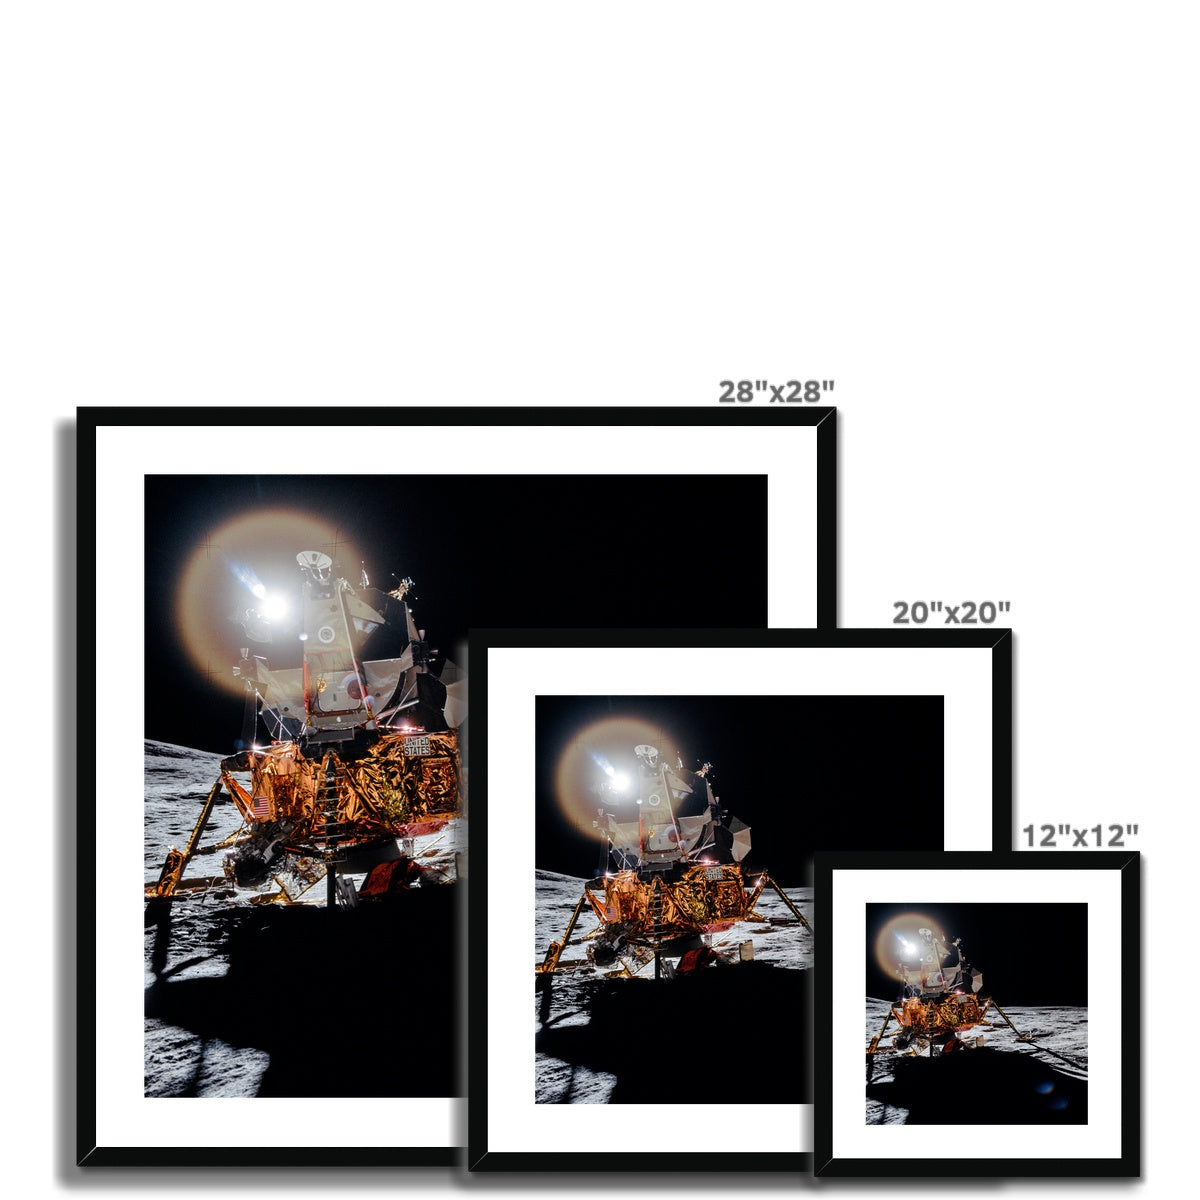 Antares' Flame Framed & Mounted Print